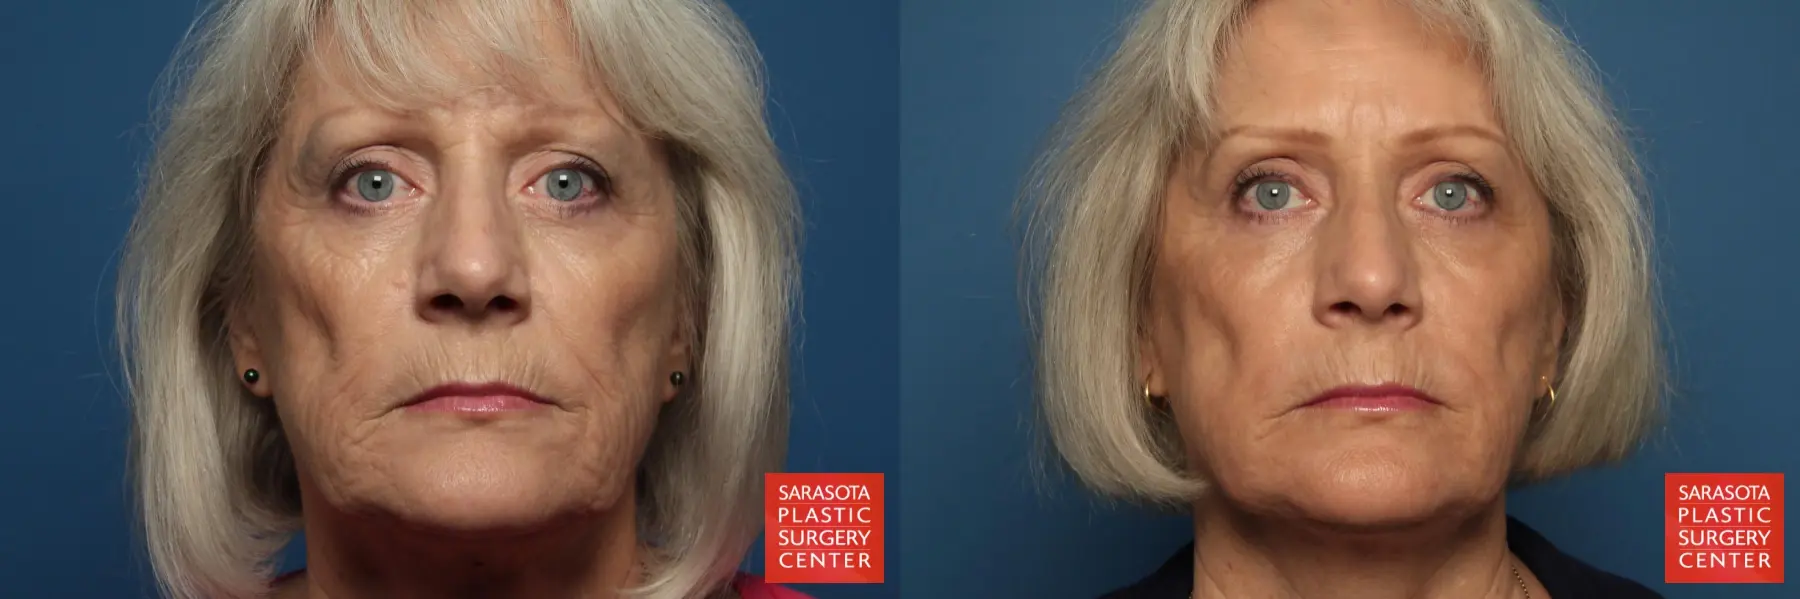 Laser Skin Resurfacing - Face: Patient 3 - Before and After 1